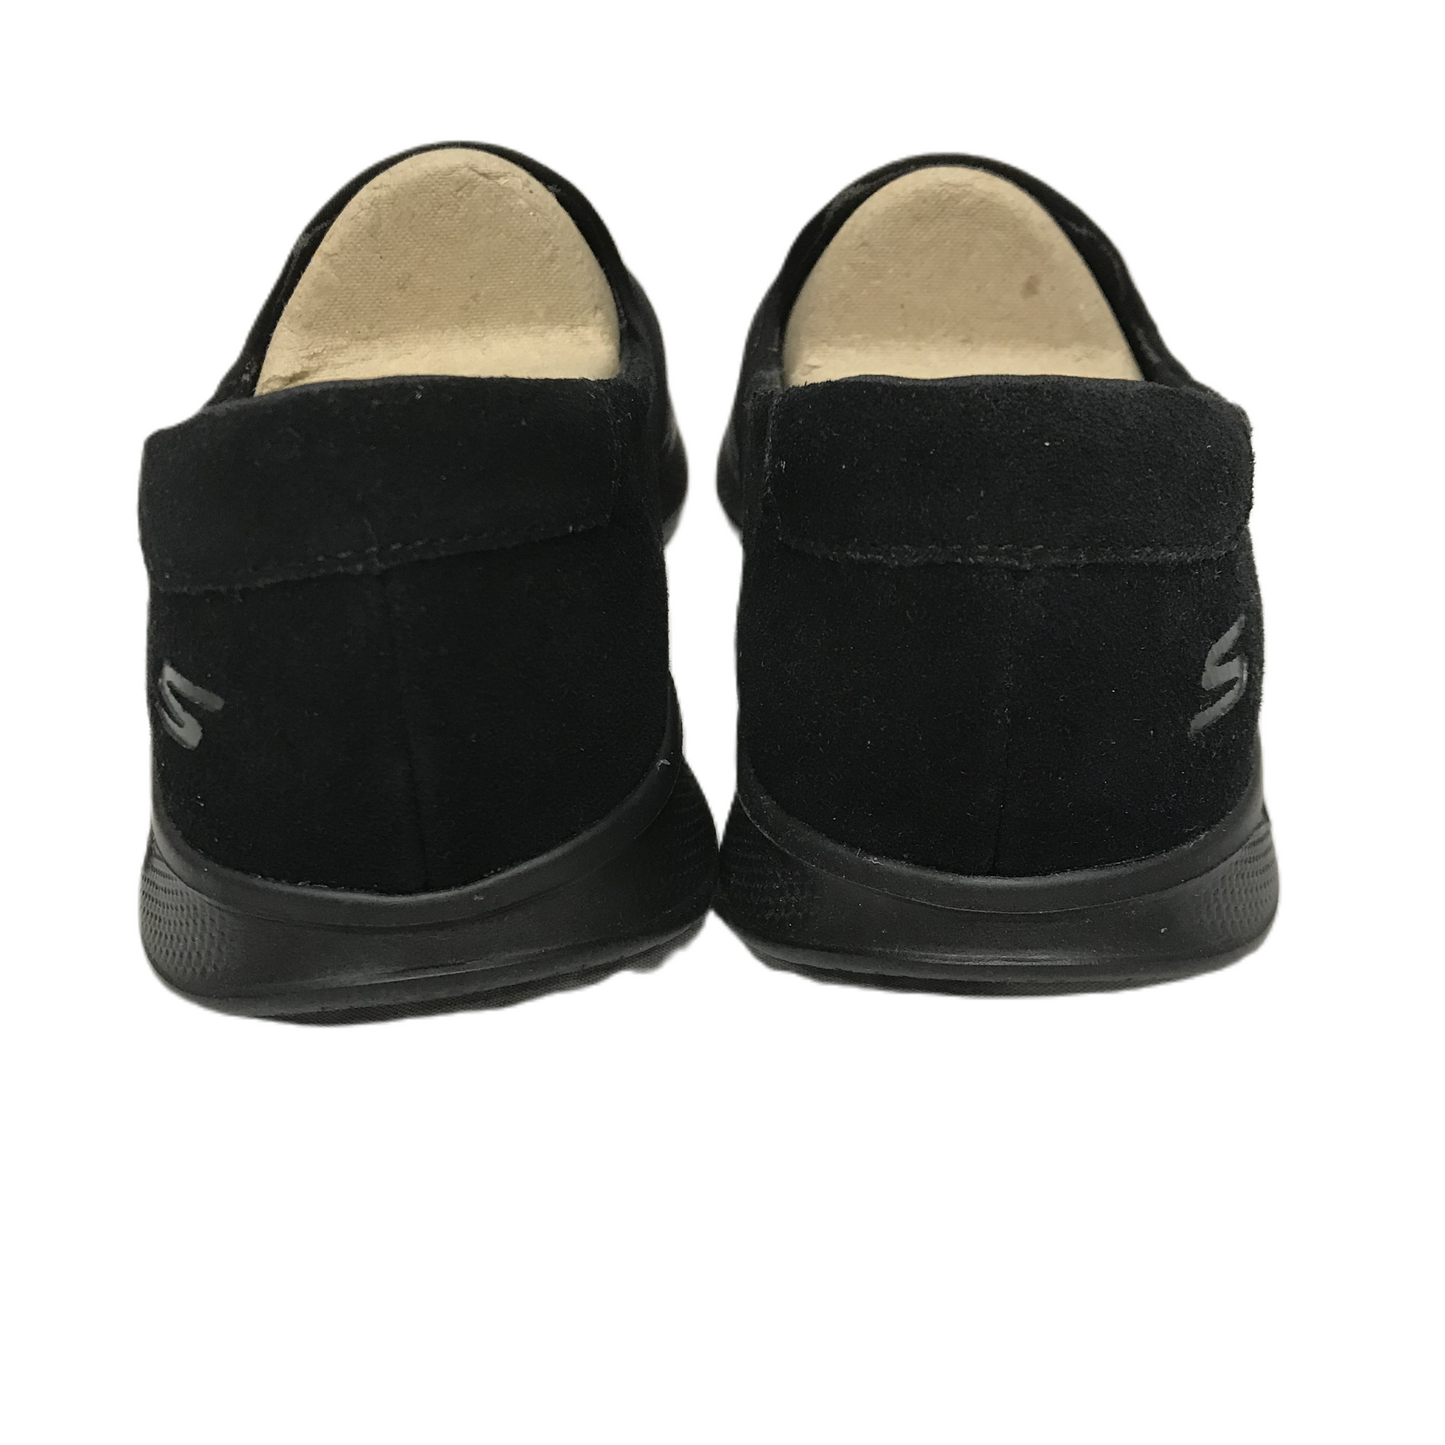 Black Shoes Flats By Skechers, Size: 9